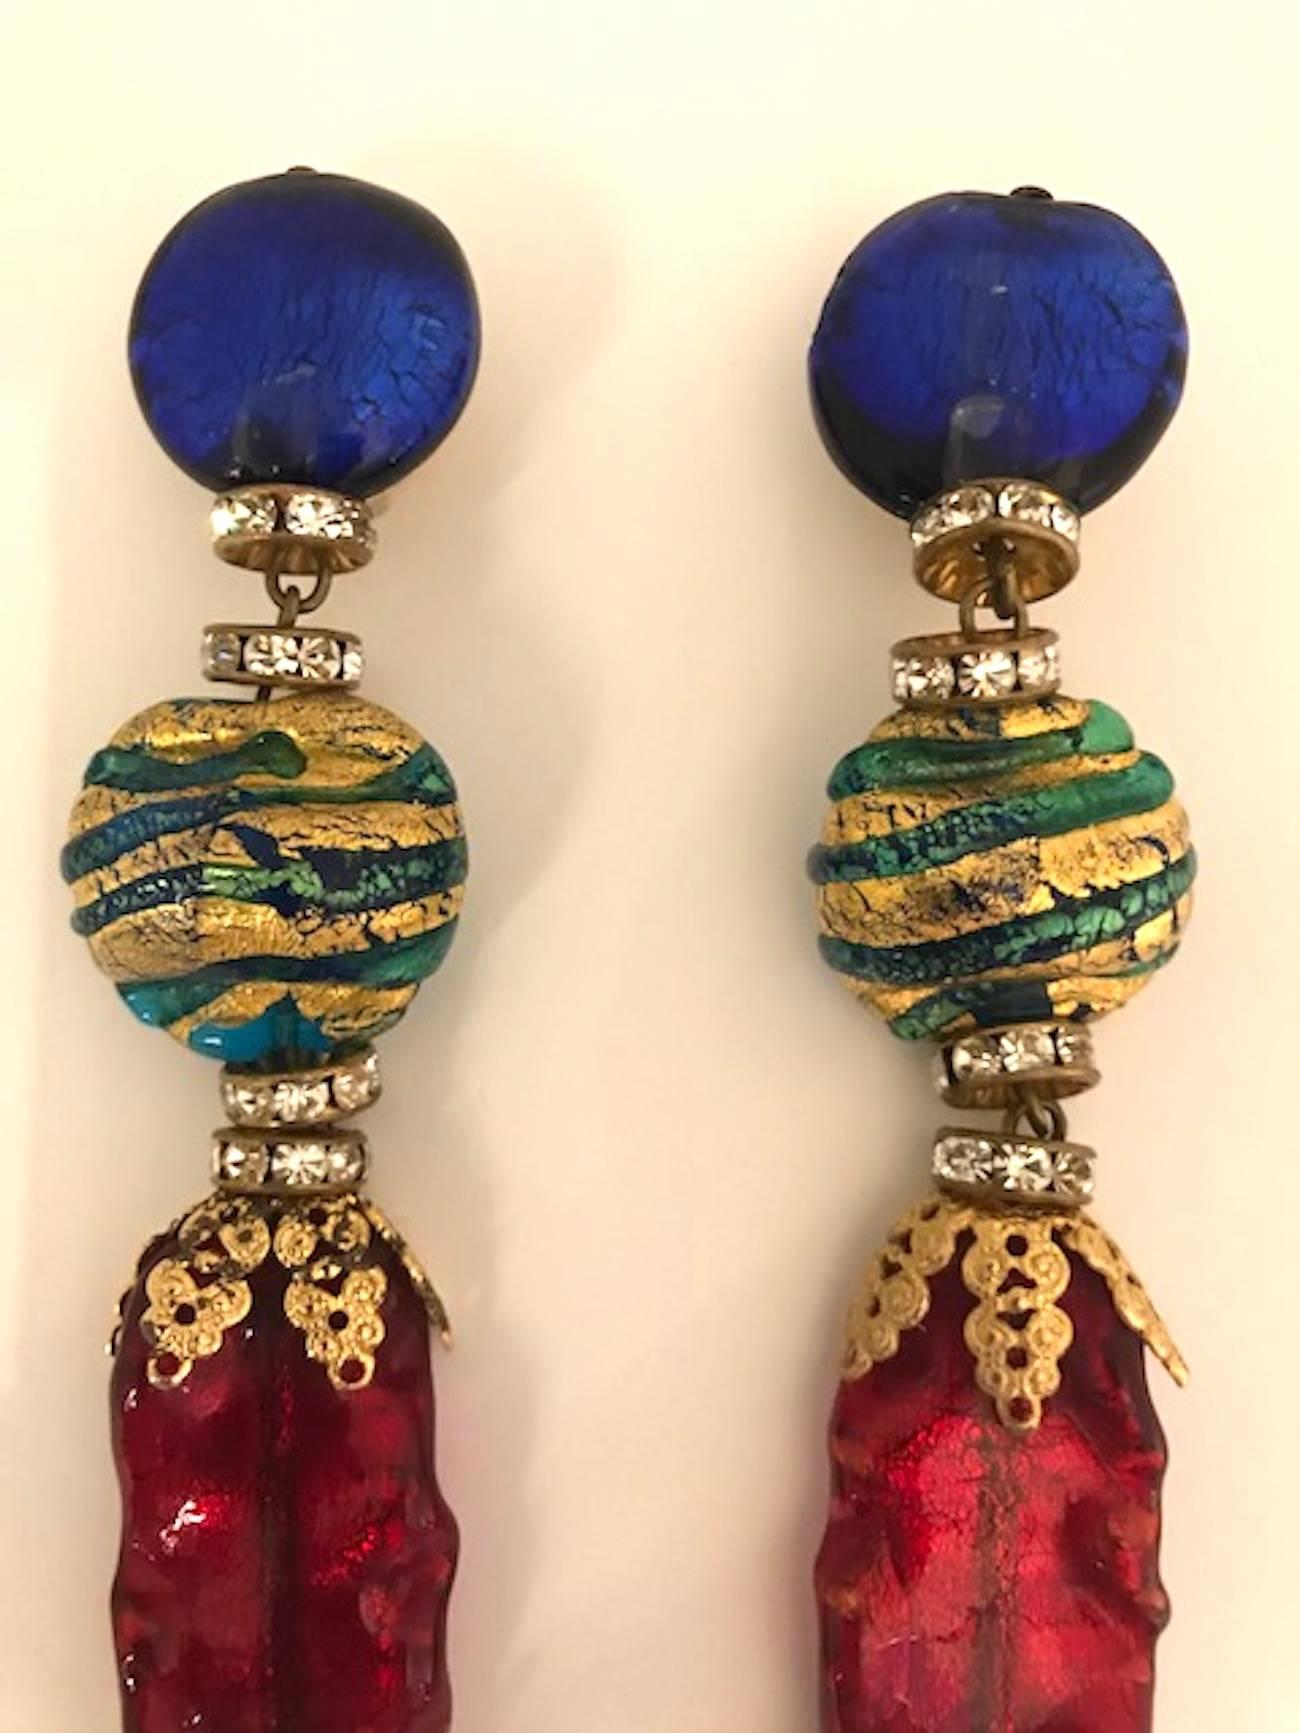 A lovely pair of Venetian glass bead and rhinestone rondelle pendant earrings from the 1980s. Part of the large collection of jewelry from this company owned by Elsa Martinelli. The red, blue and green glass bead are individually formed by hand with